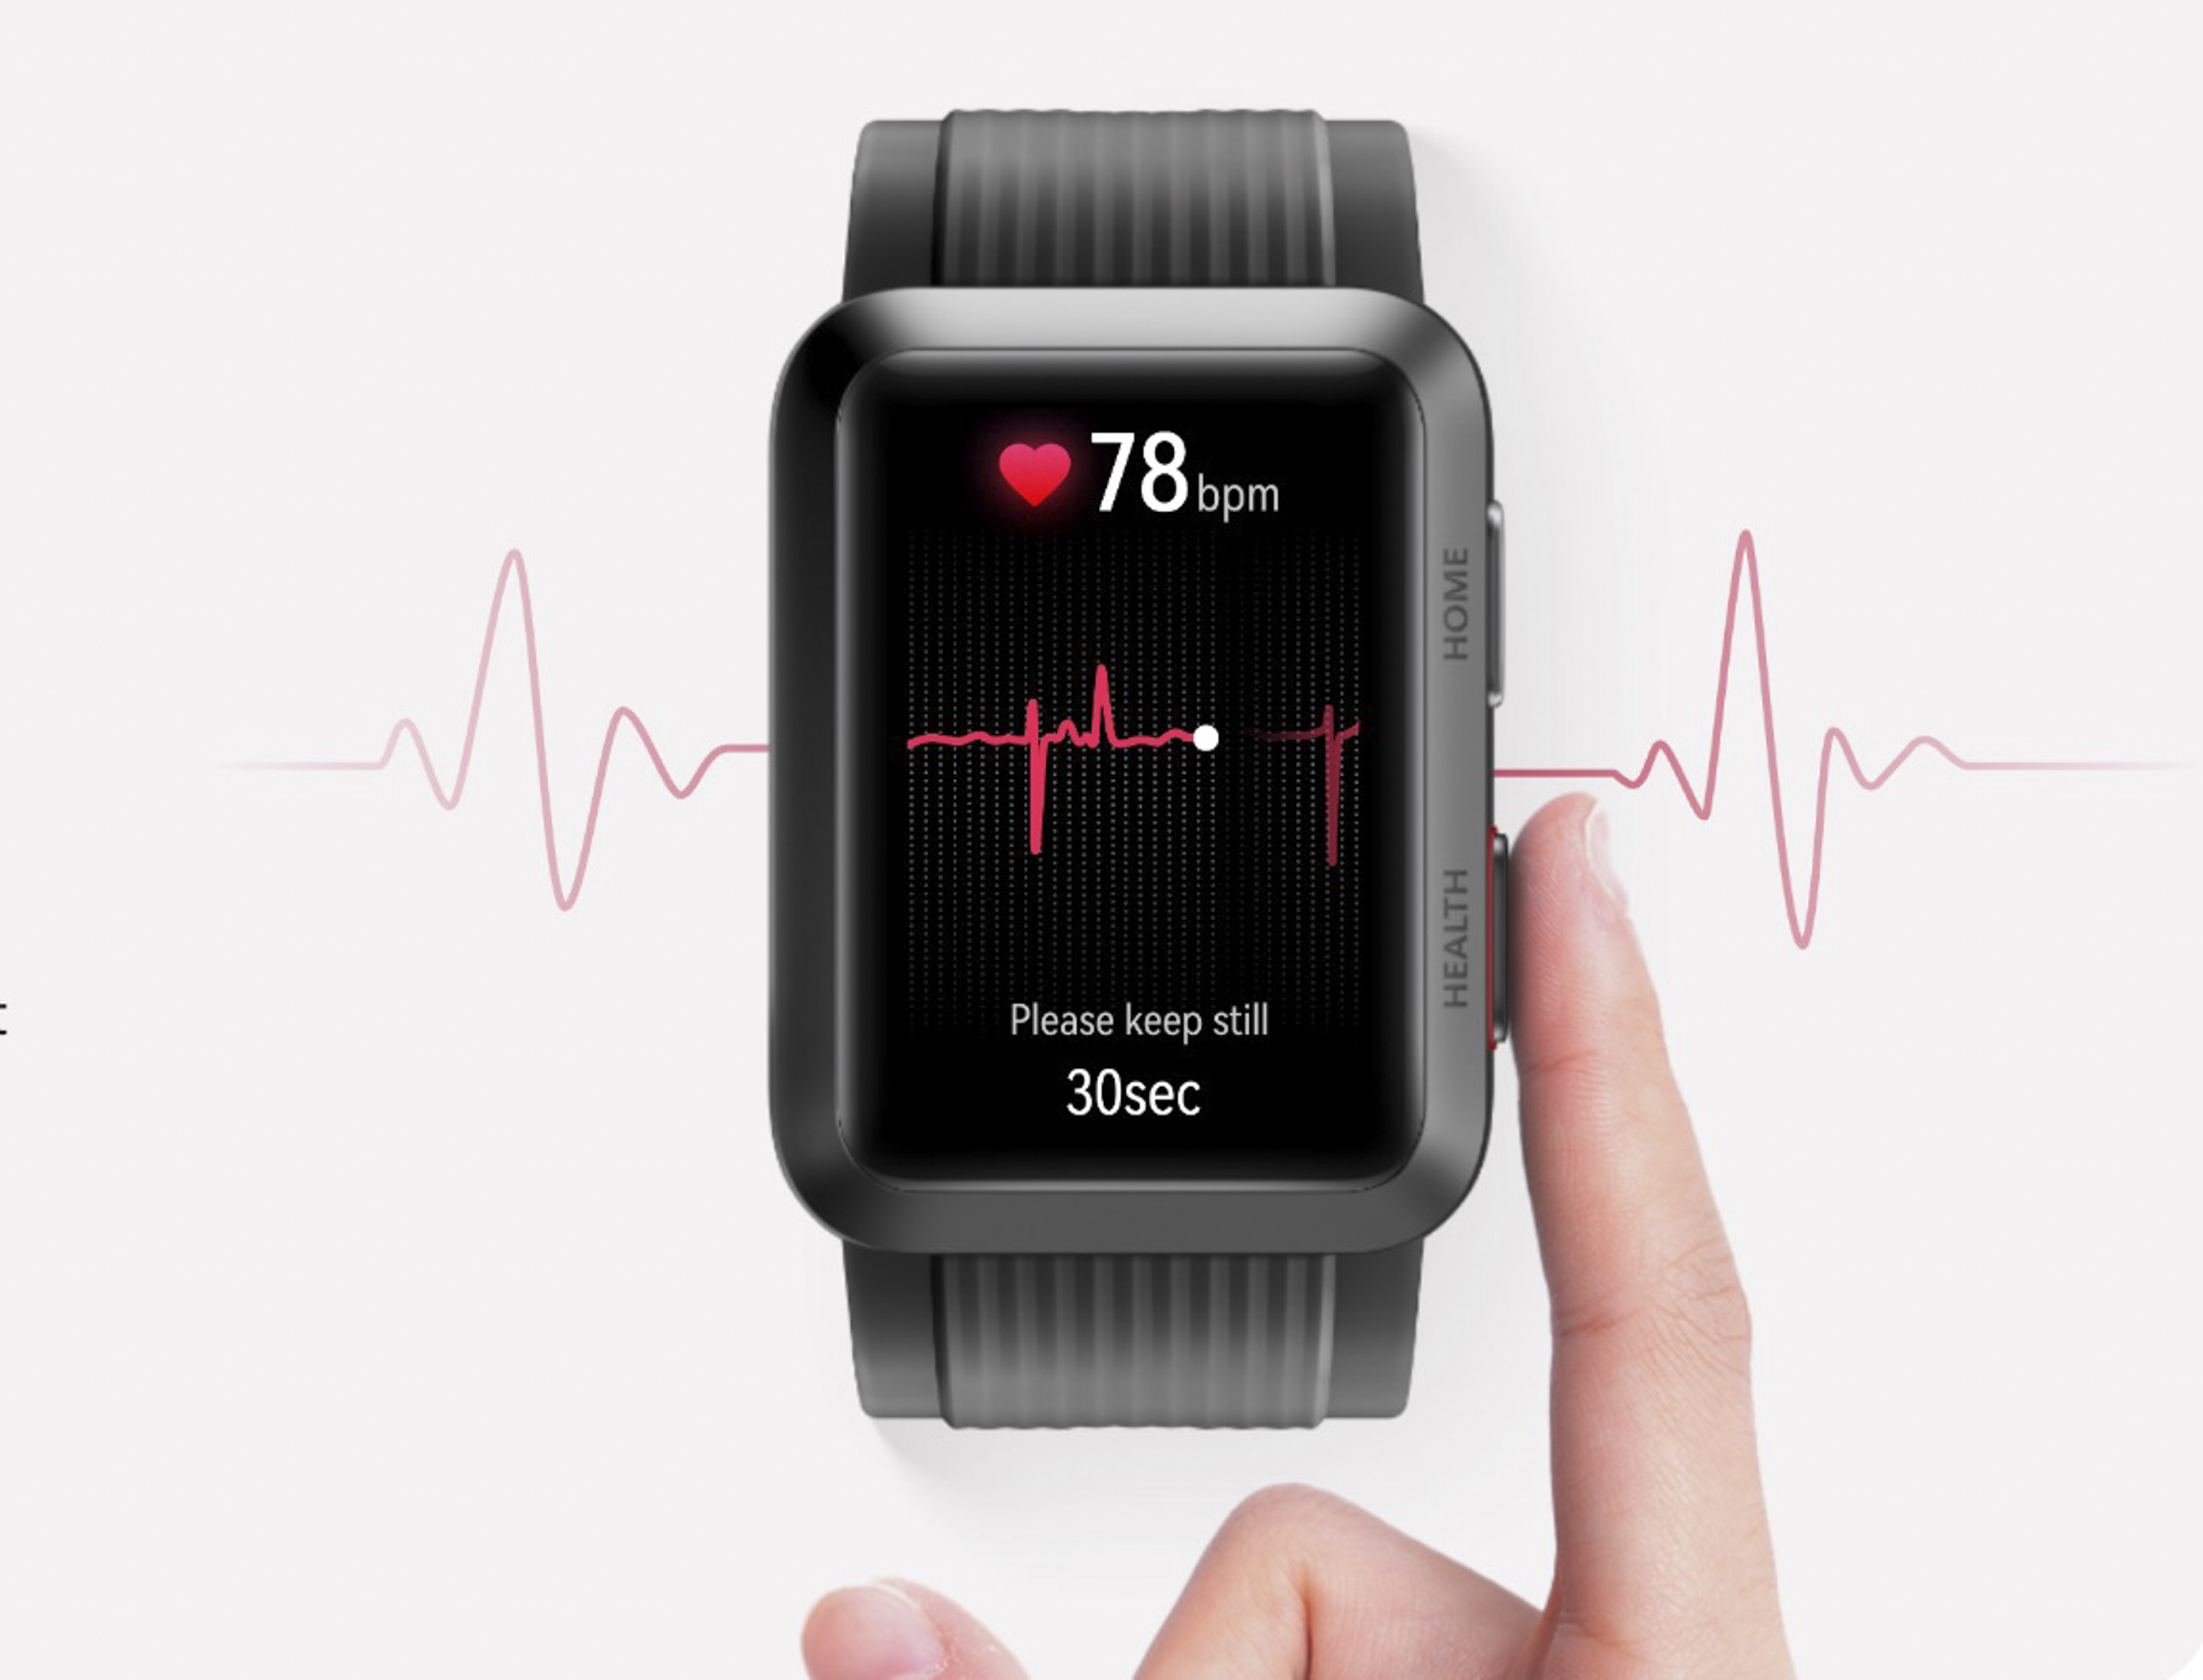 The Watch D by Huawei uses a built-in inflatable strap to measure blood pressure. Photo: Huawei